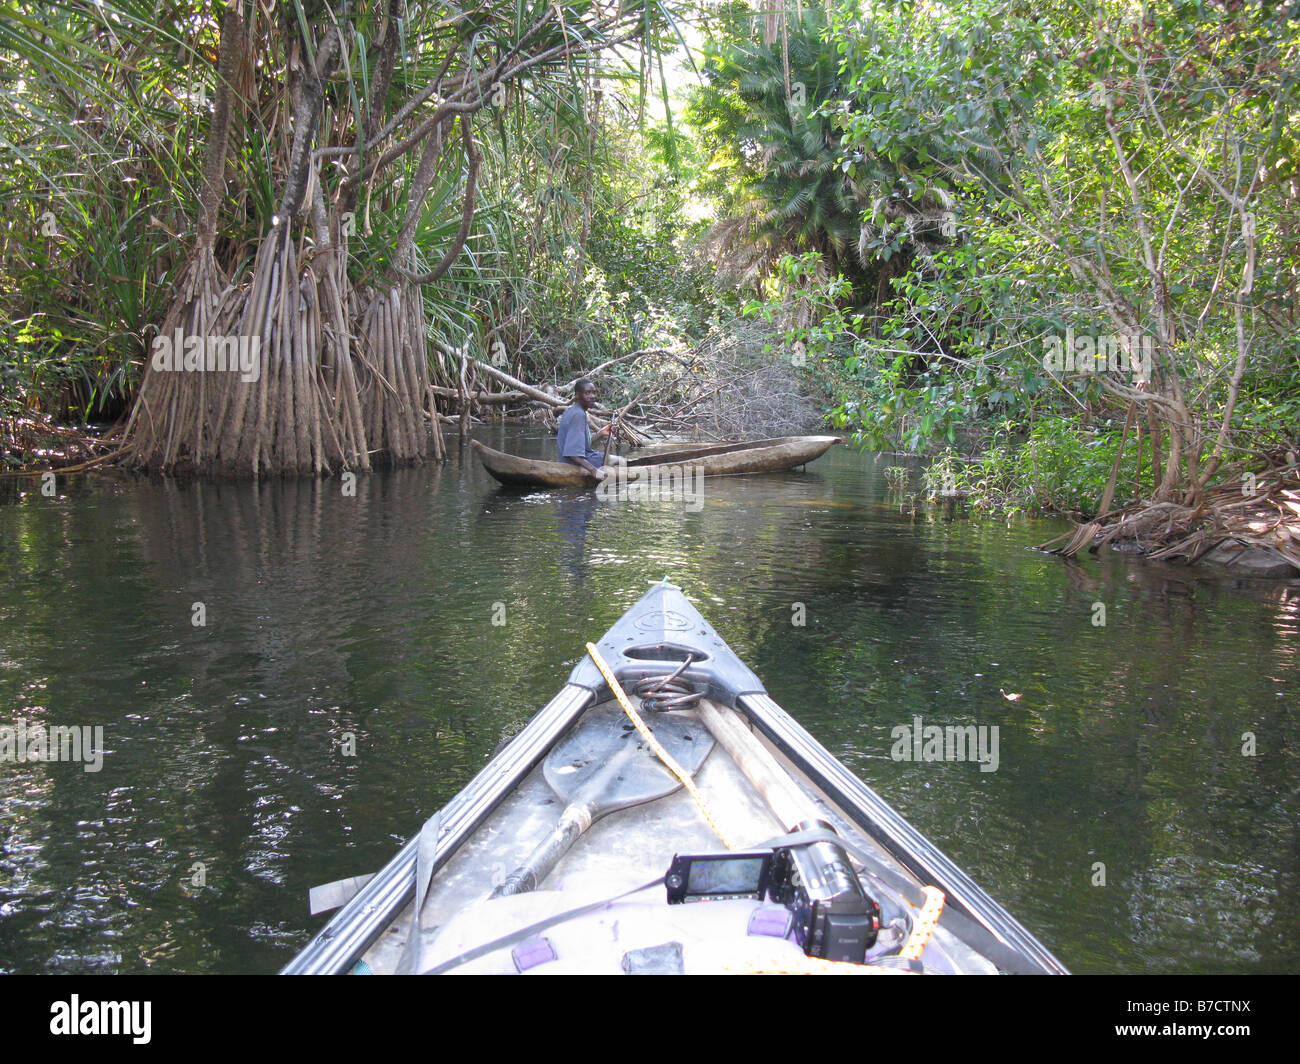 Canadian canoe prow with Bemba fisherman in dugout canoe on Luapula river close to Mambilima Falls Democratic Republic of Congo Stock Photo